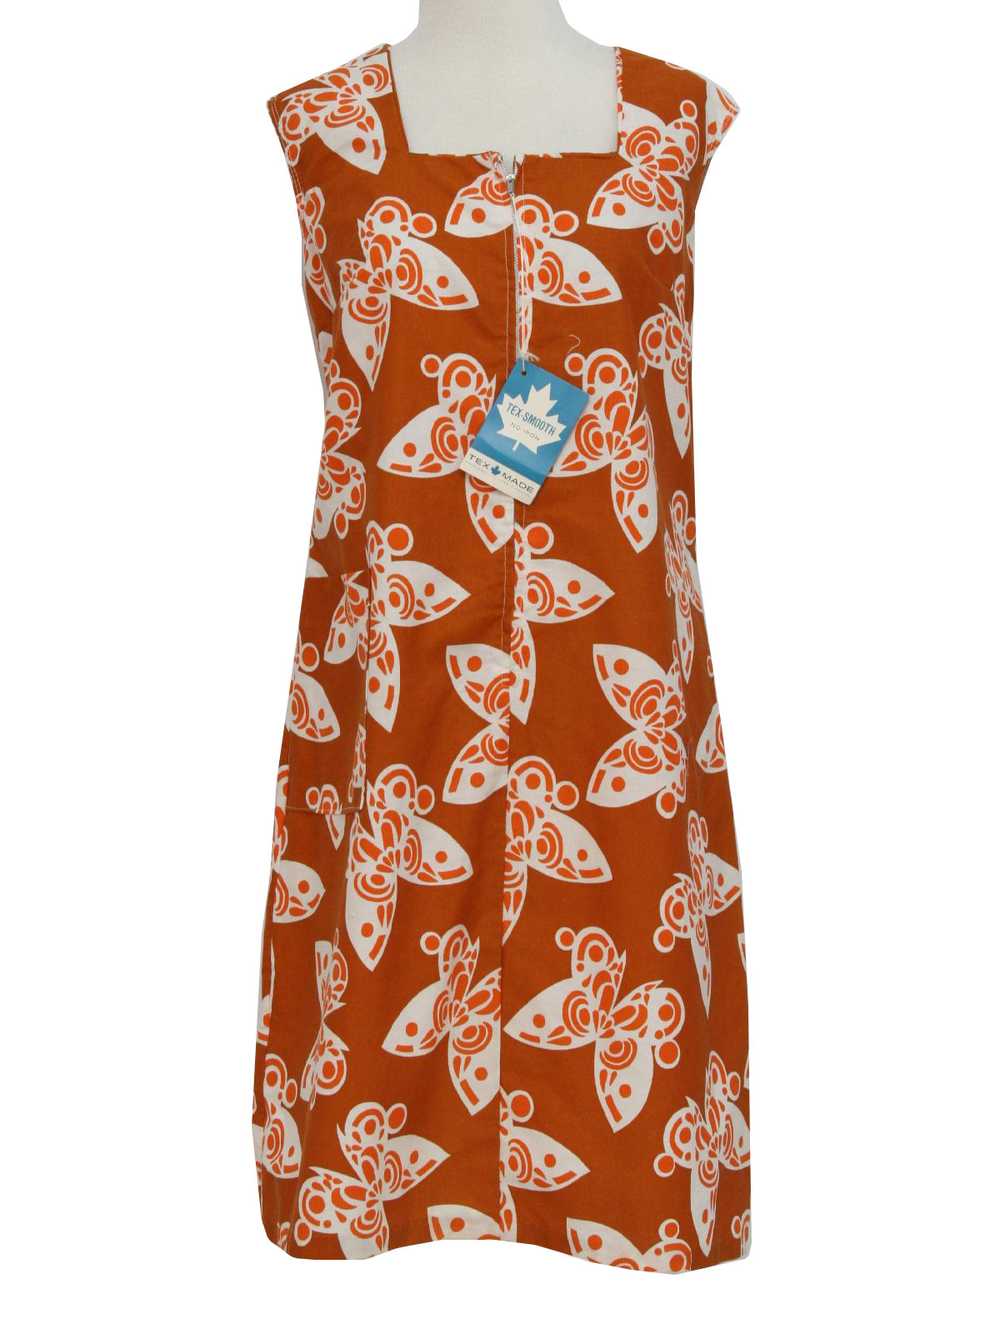 1960's Chatelaine Mod Butterfly Print Dress - image 1